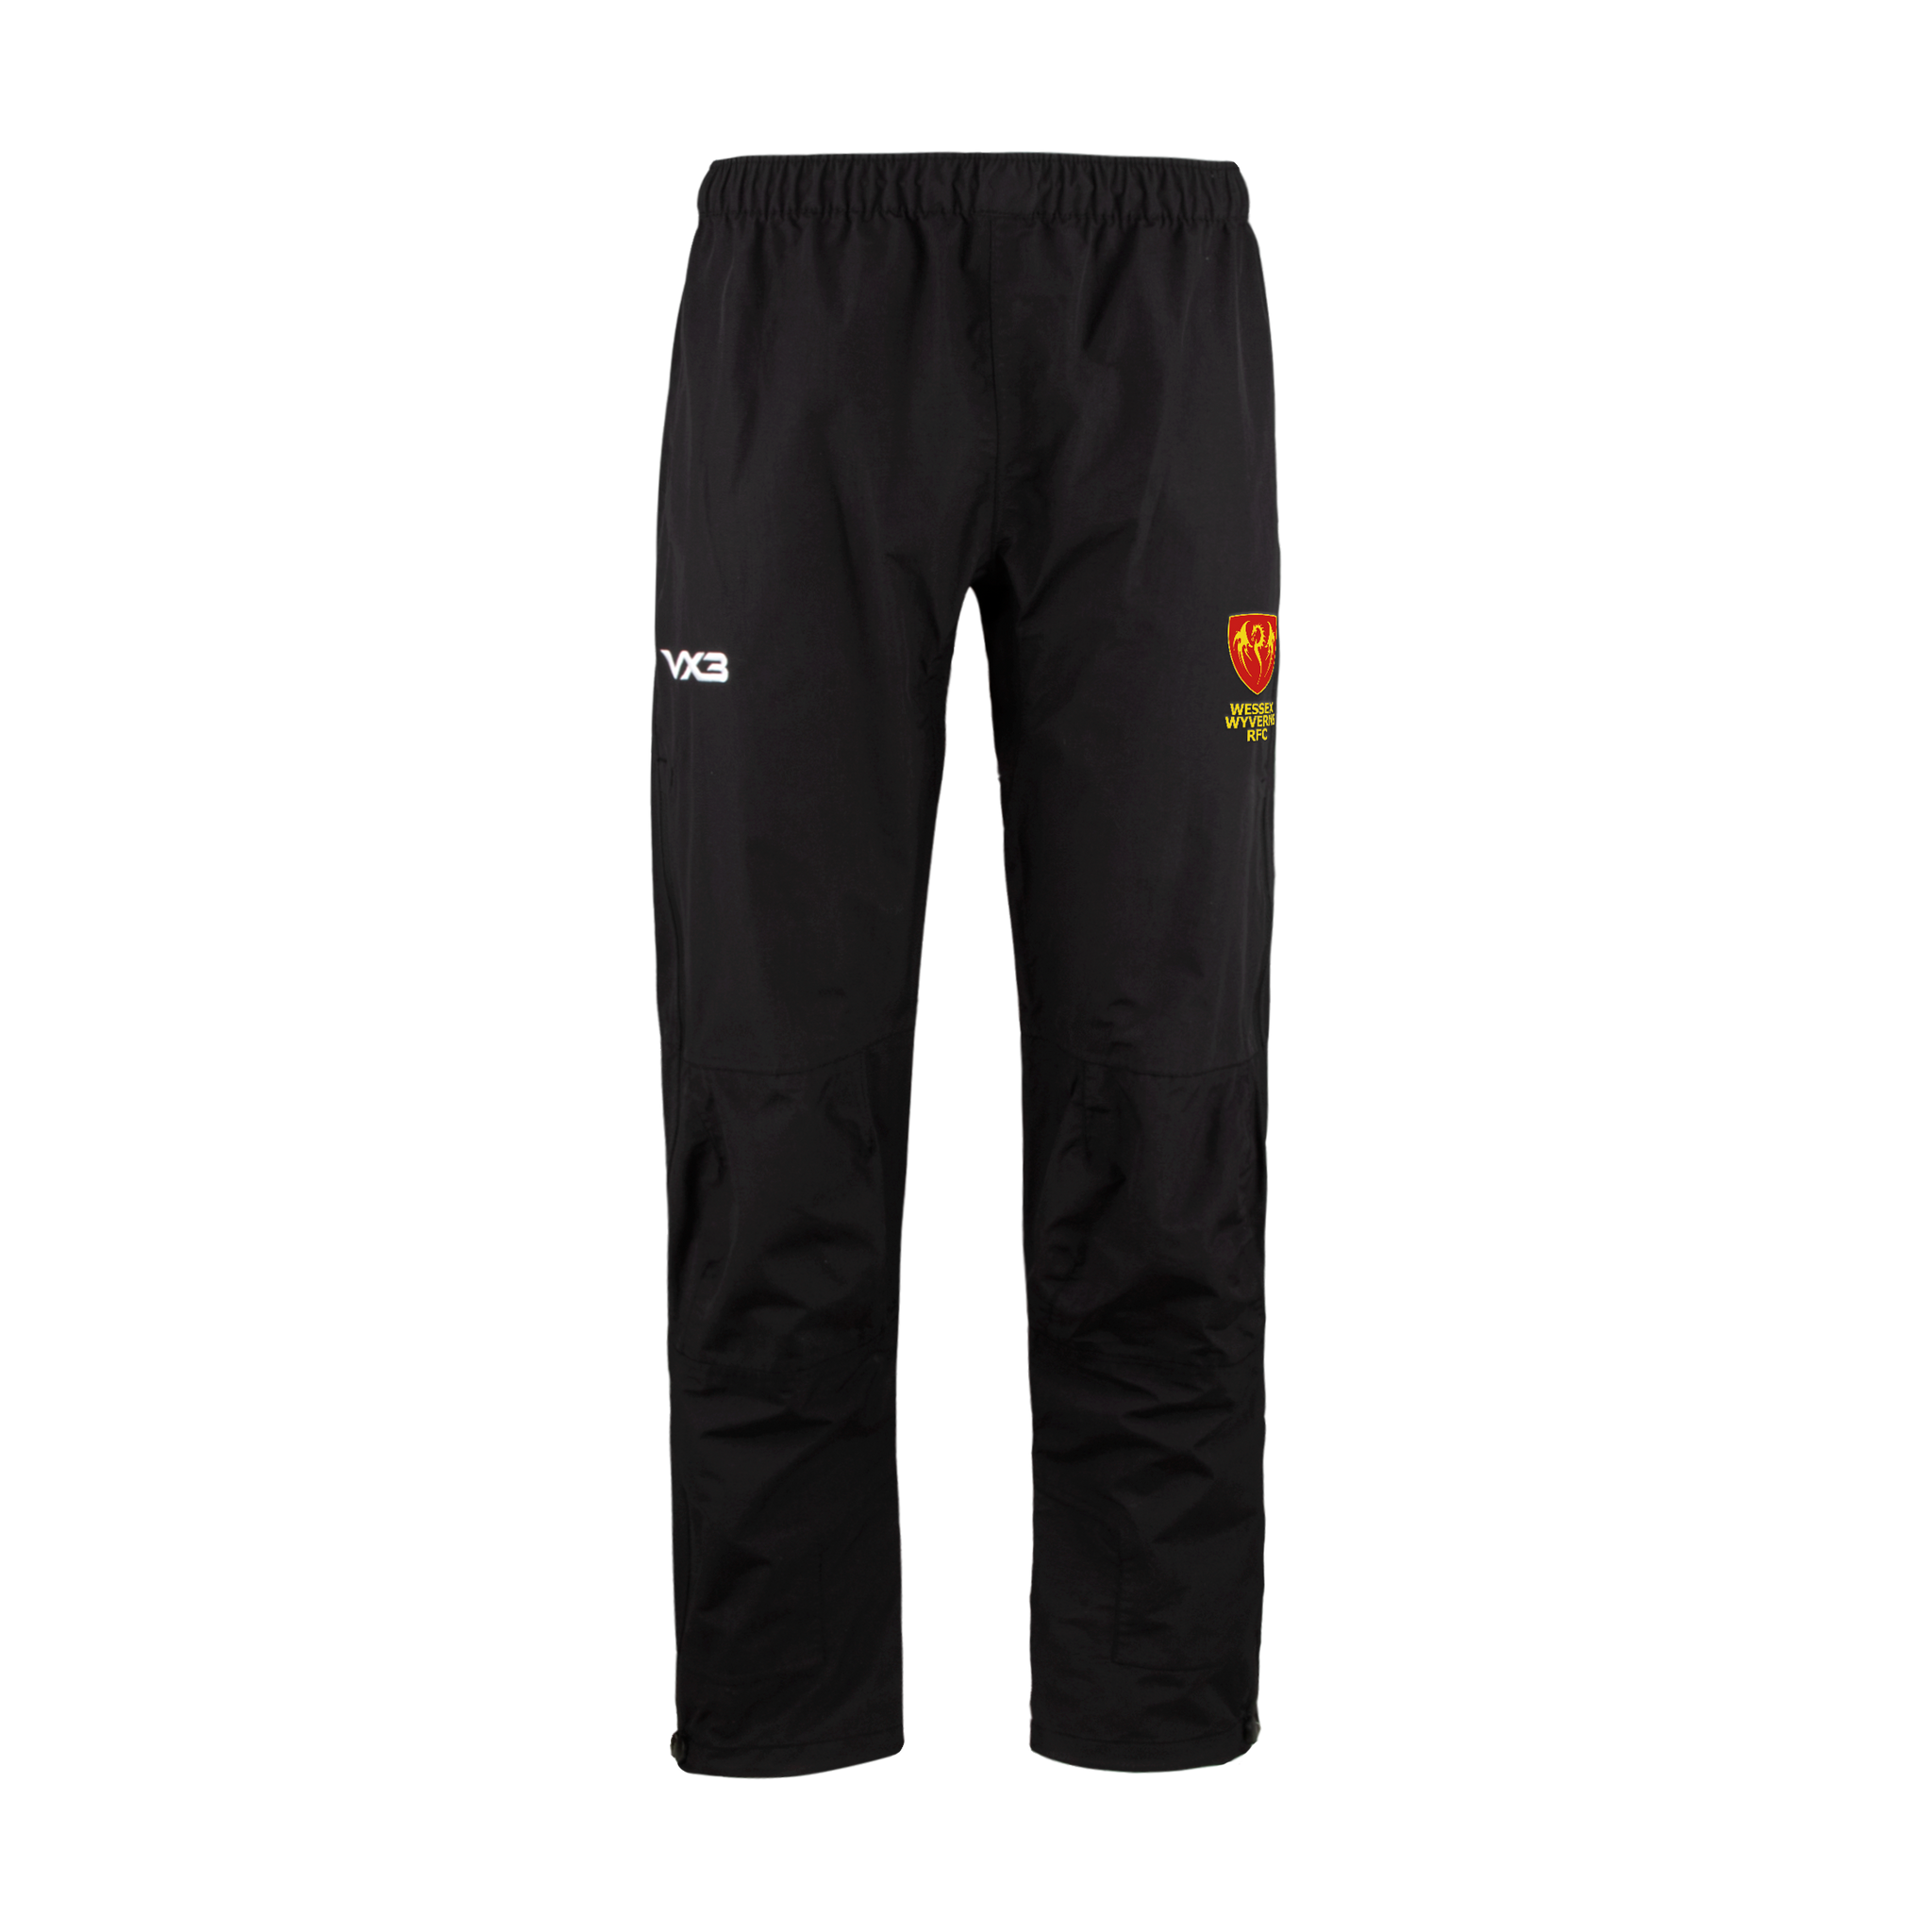 Wessex Wyverns RFC Protego Waterproof Trousers